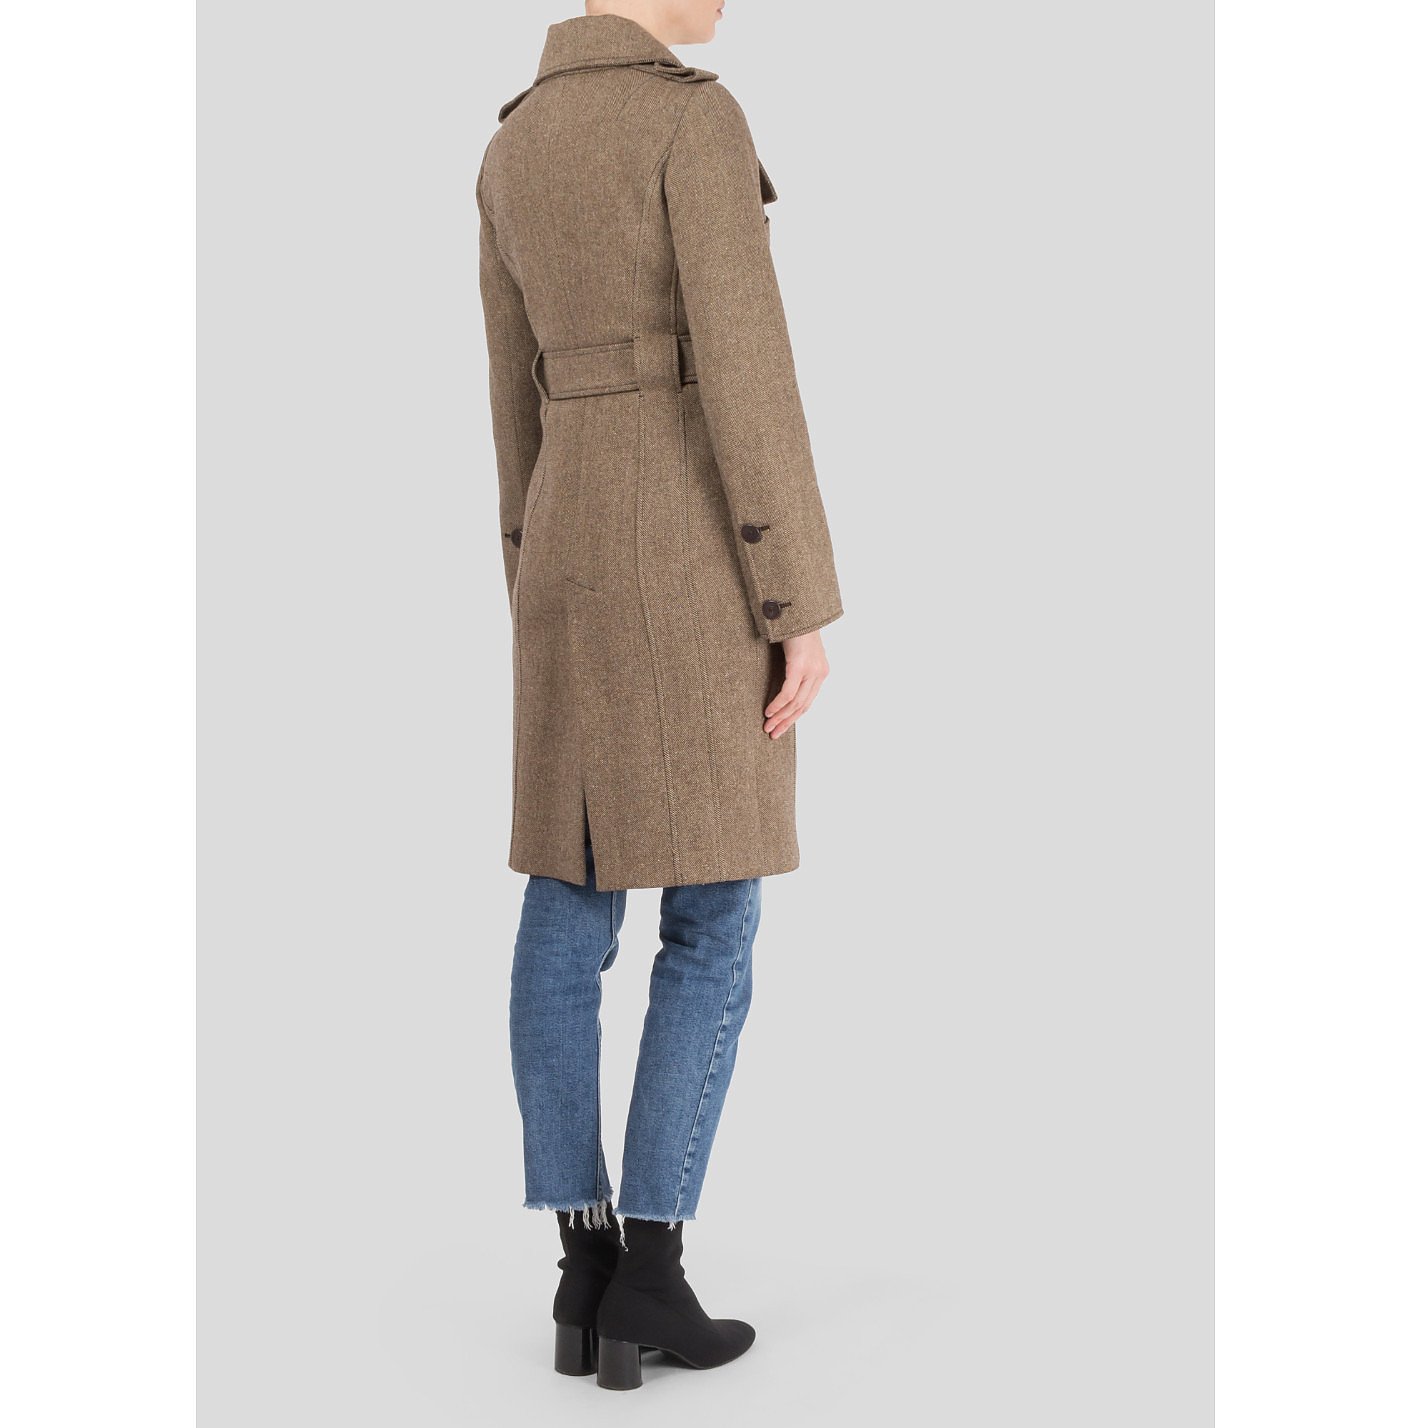 Patrizia Pepe Double Breasted Wool-Blend Coat